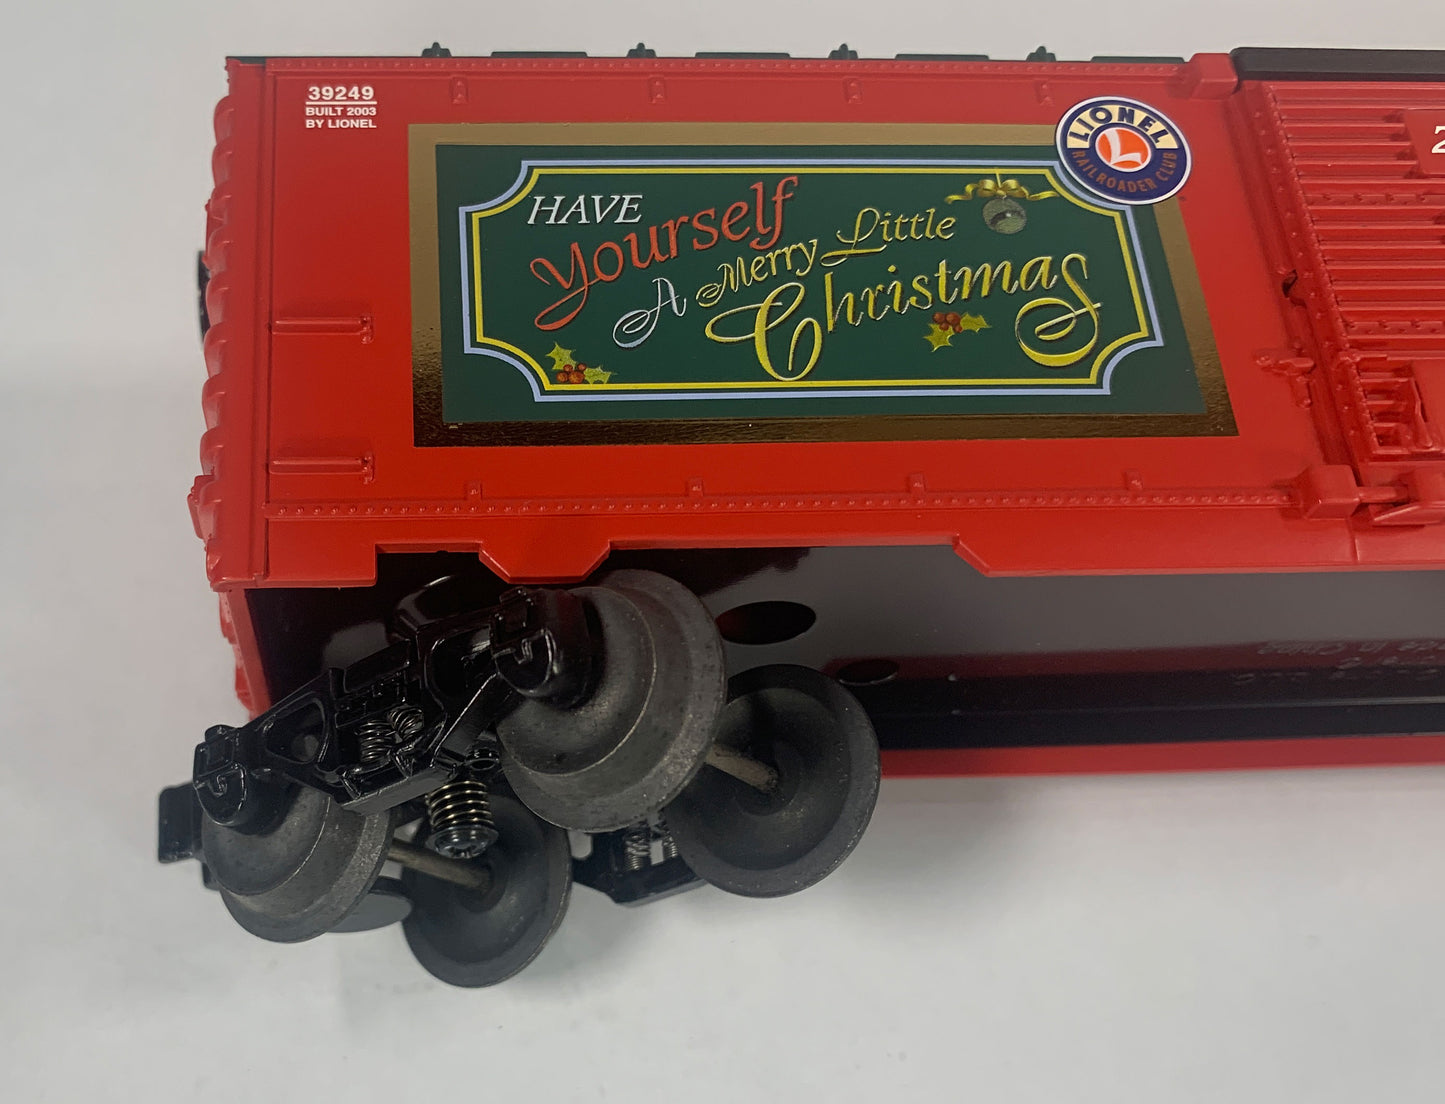 LIONEL • O GAUGE • 2003 LRRC Christmas Boxcar 6-32949 • NEW OLD STOCK